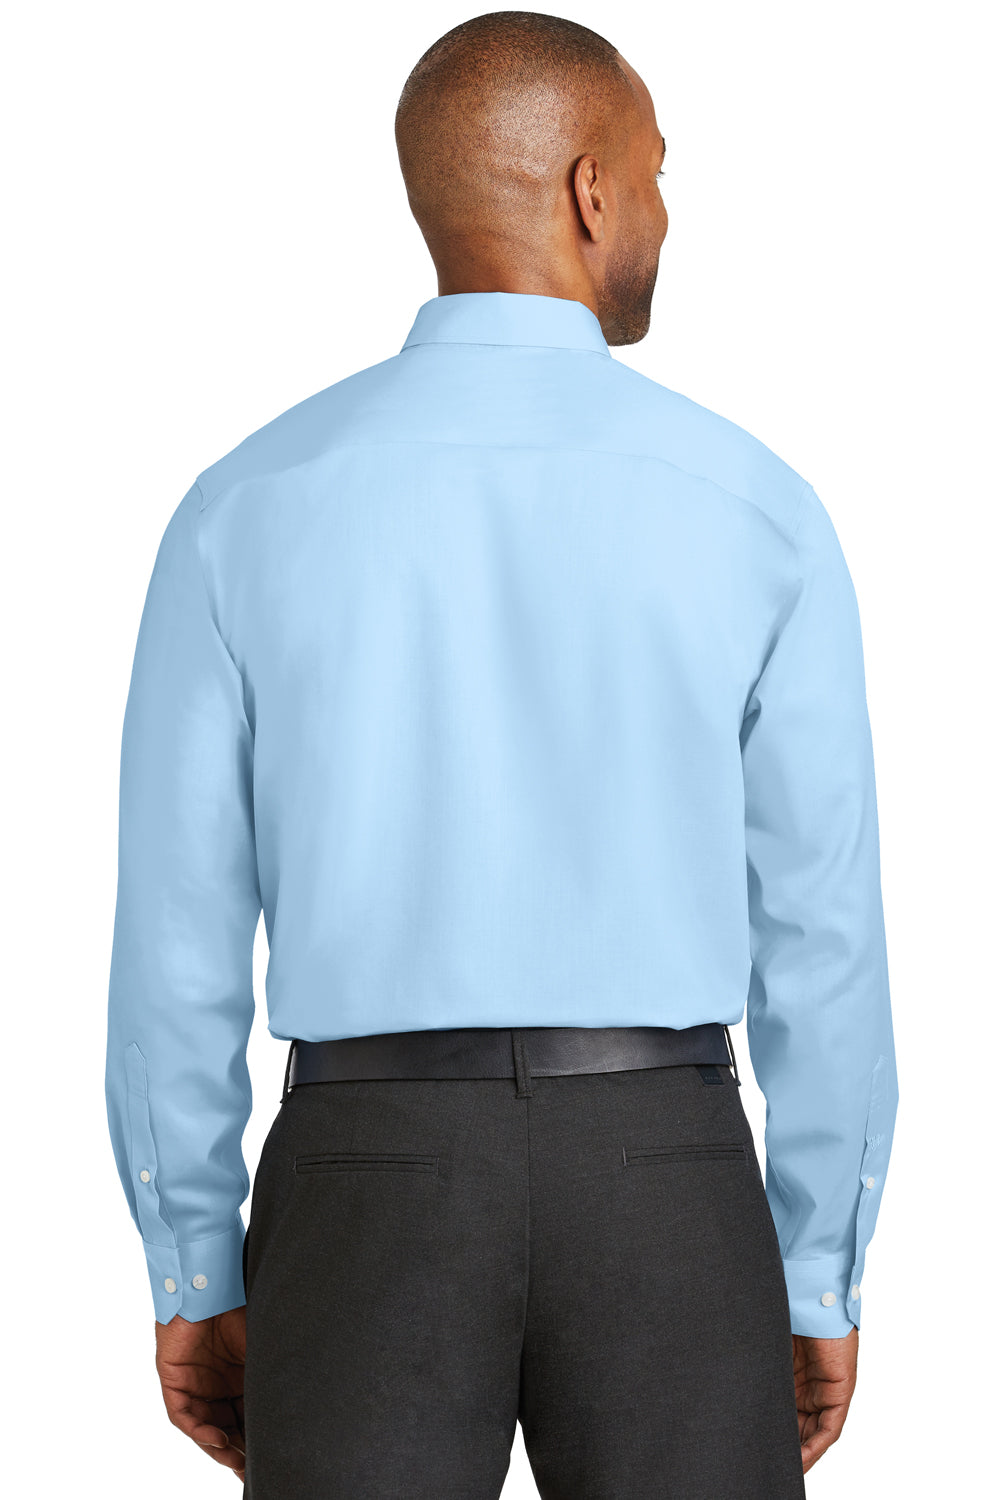 Red House RH78 Mens Wrinkle Resistant Long Sleeve Button Down Shirt w/ Pocket Heritage Blue Back